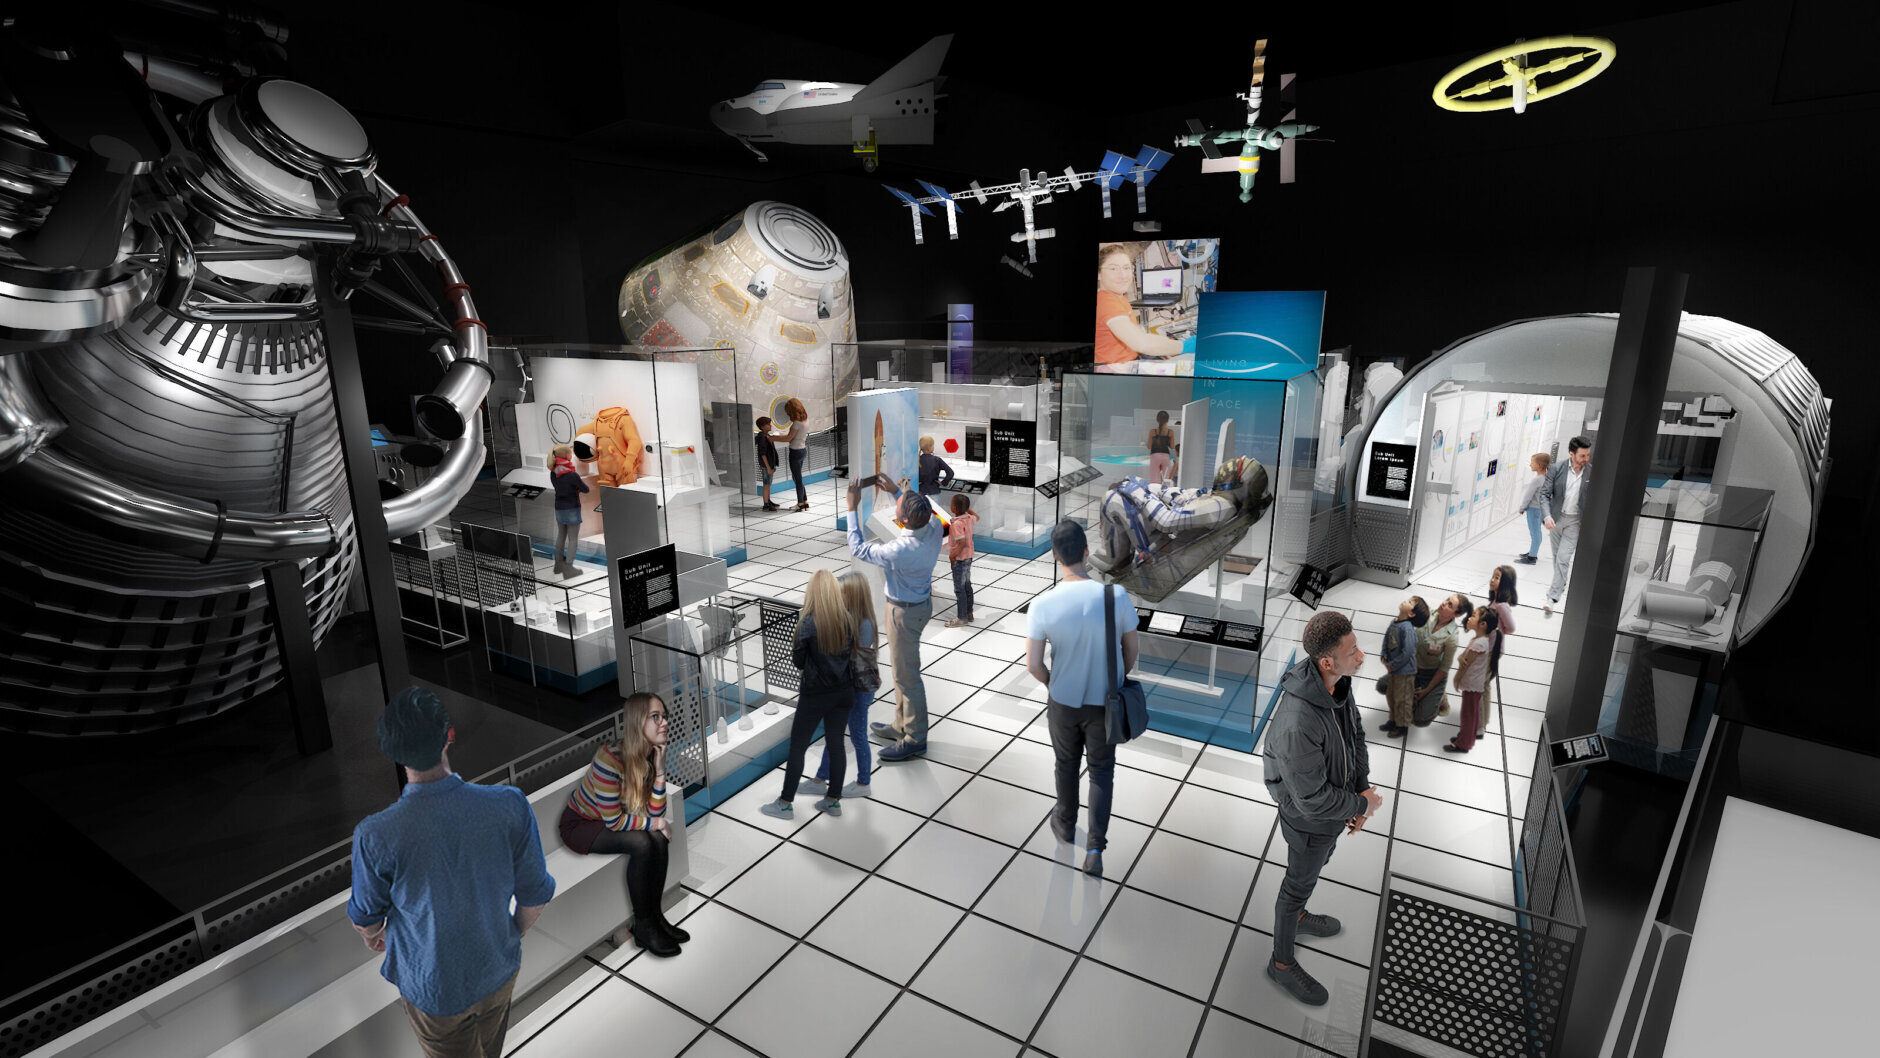 At Home in Space exhibition